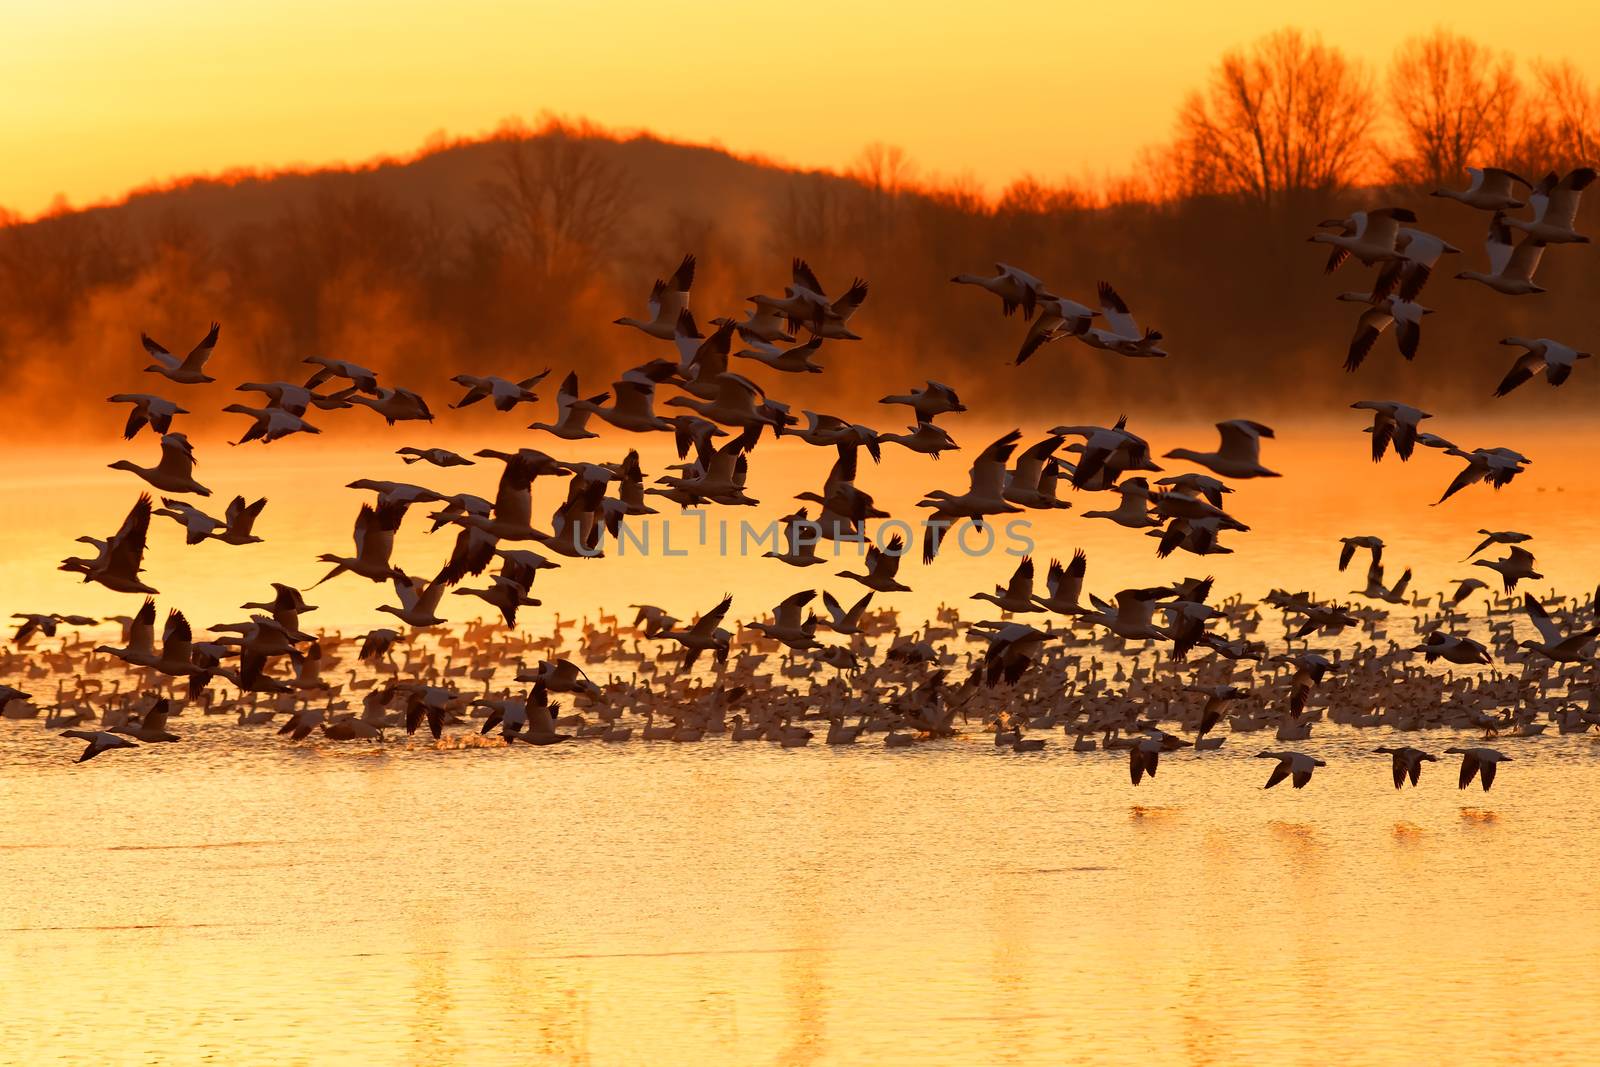 Snow Geese Flying at Sunrise by DelmasLehman